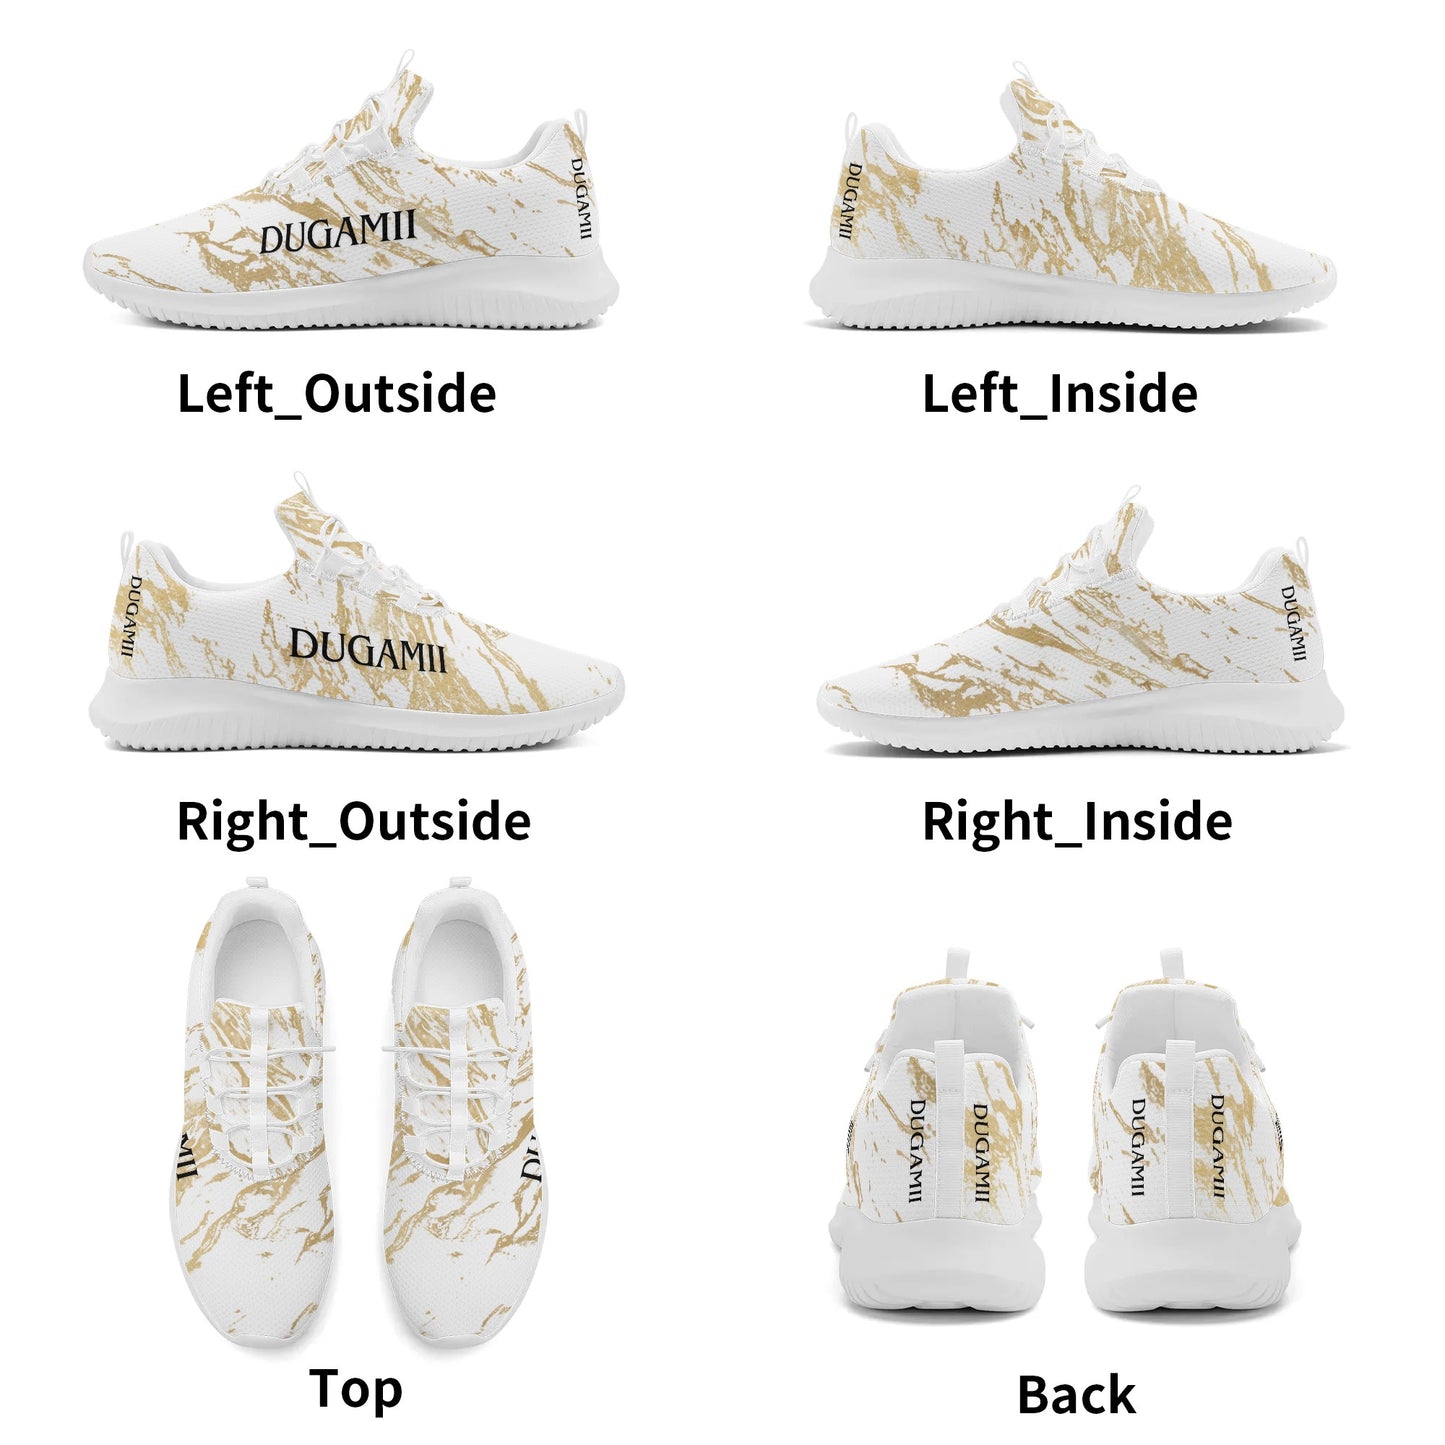 Womens DuGamii White and Gold Lace Up Running Sneakers